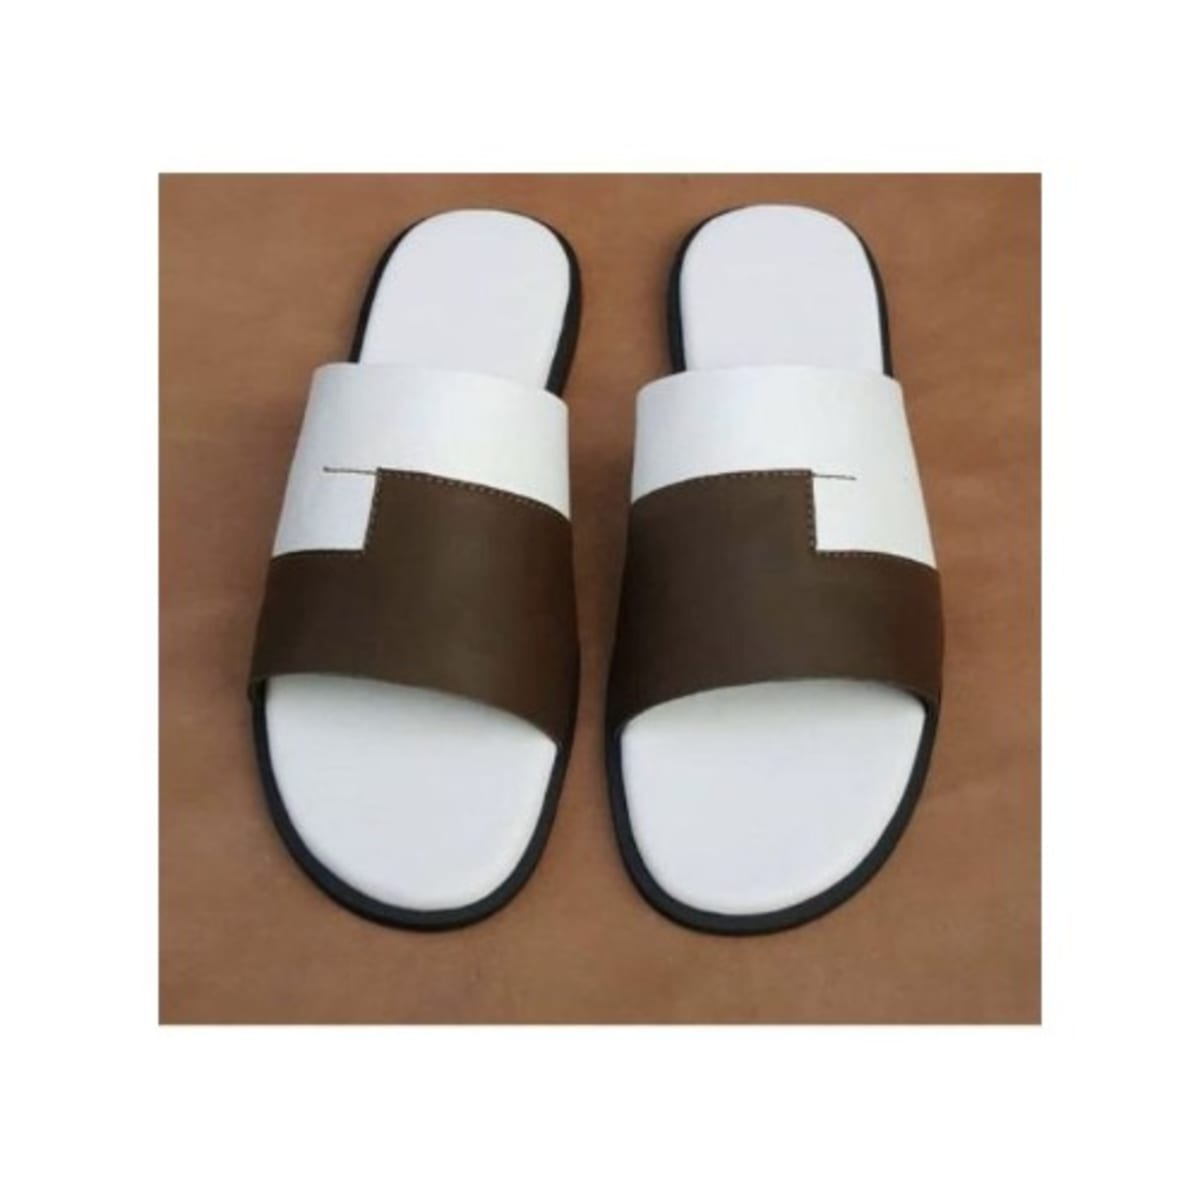 Fashion Men's Leather Palm Slippers